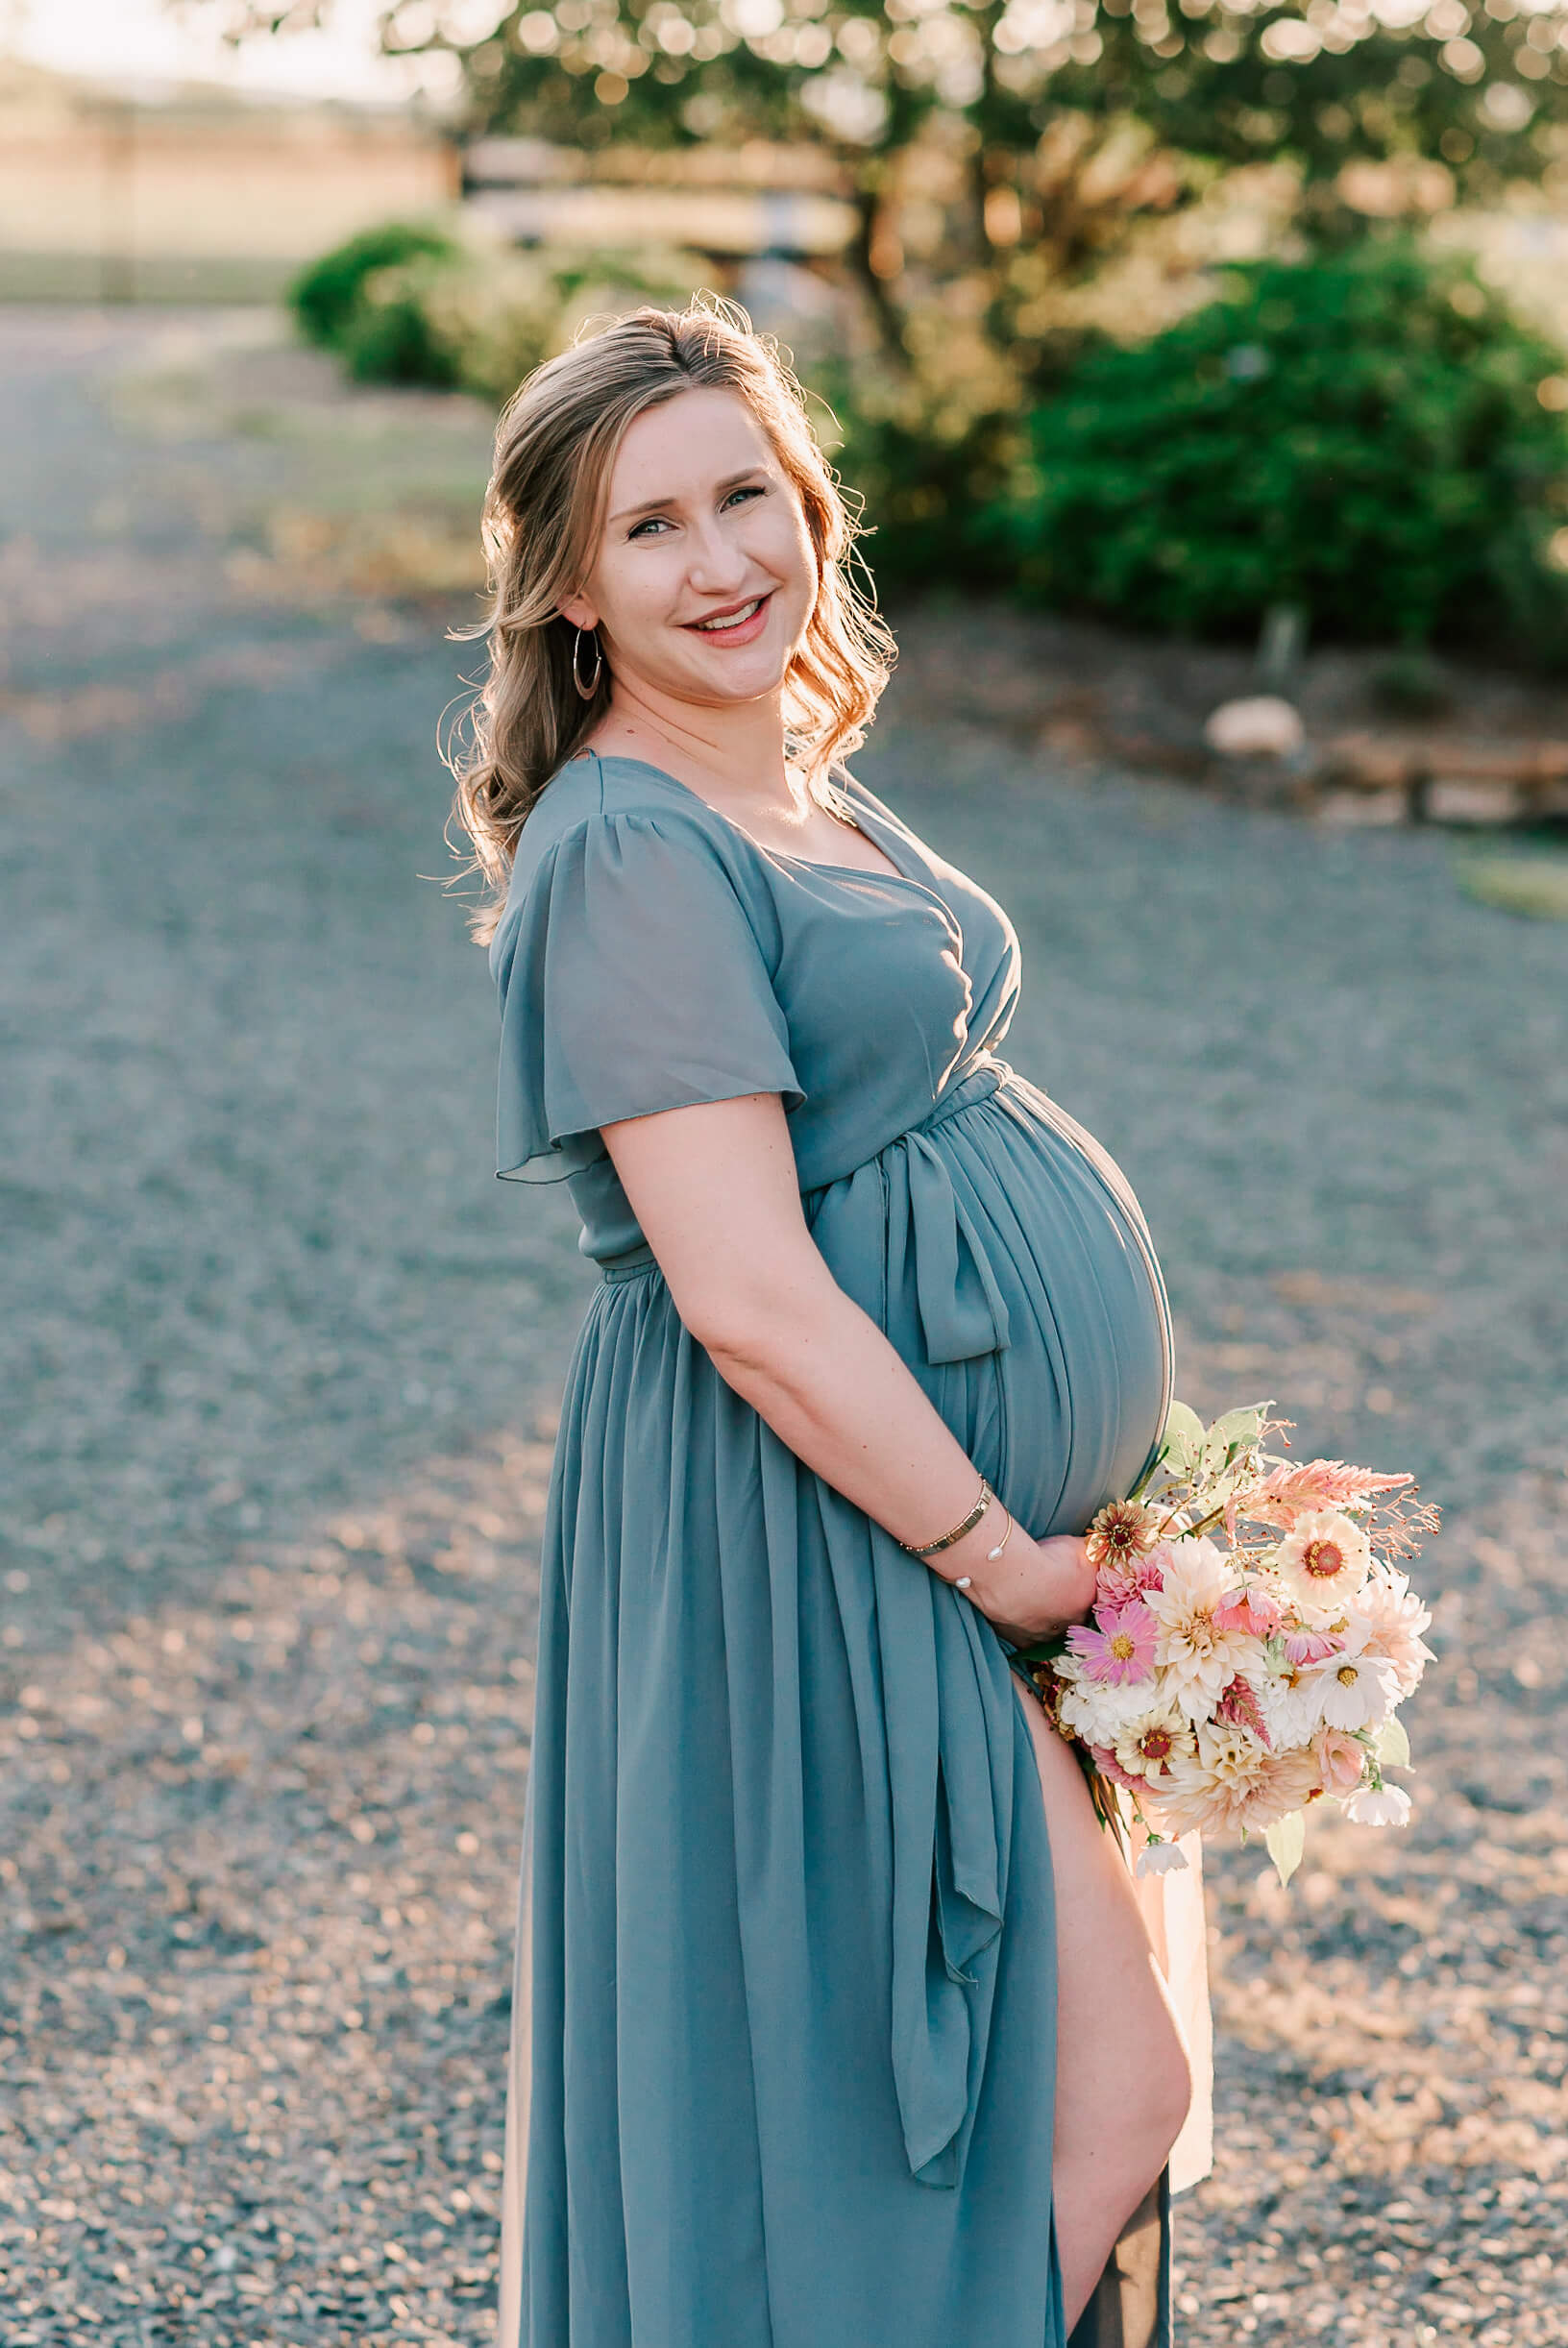 A mom to be holds a white and pink bouquet while holding her bump and standing in a garden path at sunset before getting gifts from bellies & babies